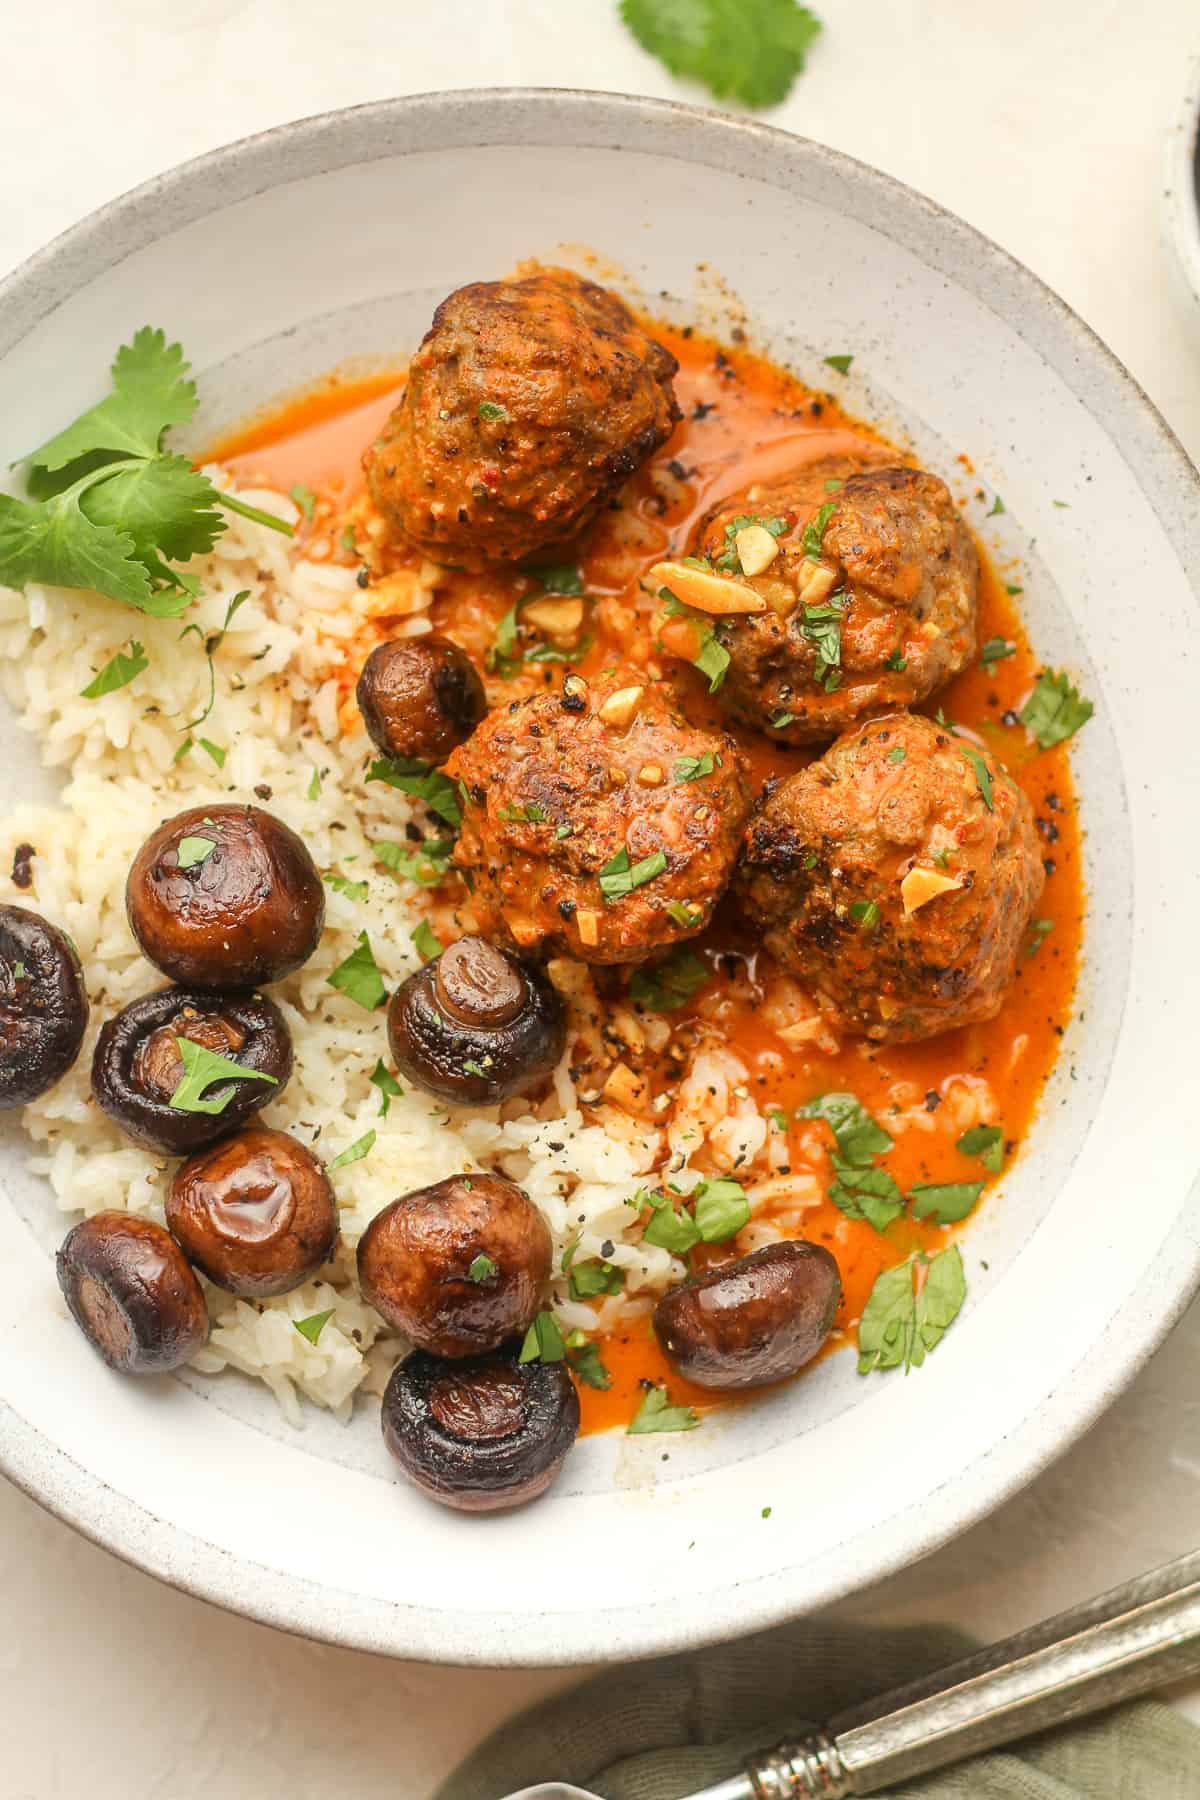 Overhead view of curried meatballs over rice and mushrooms.